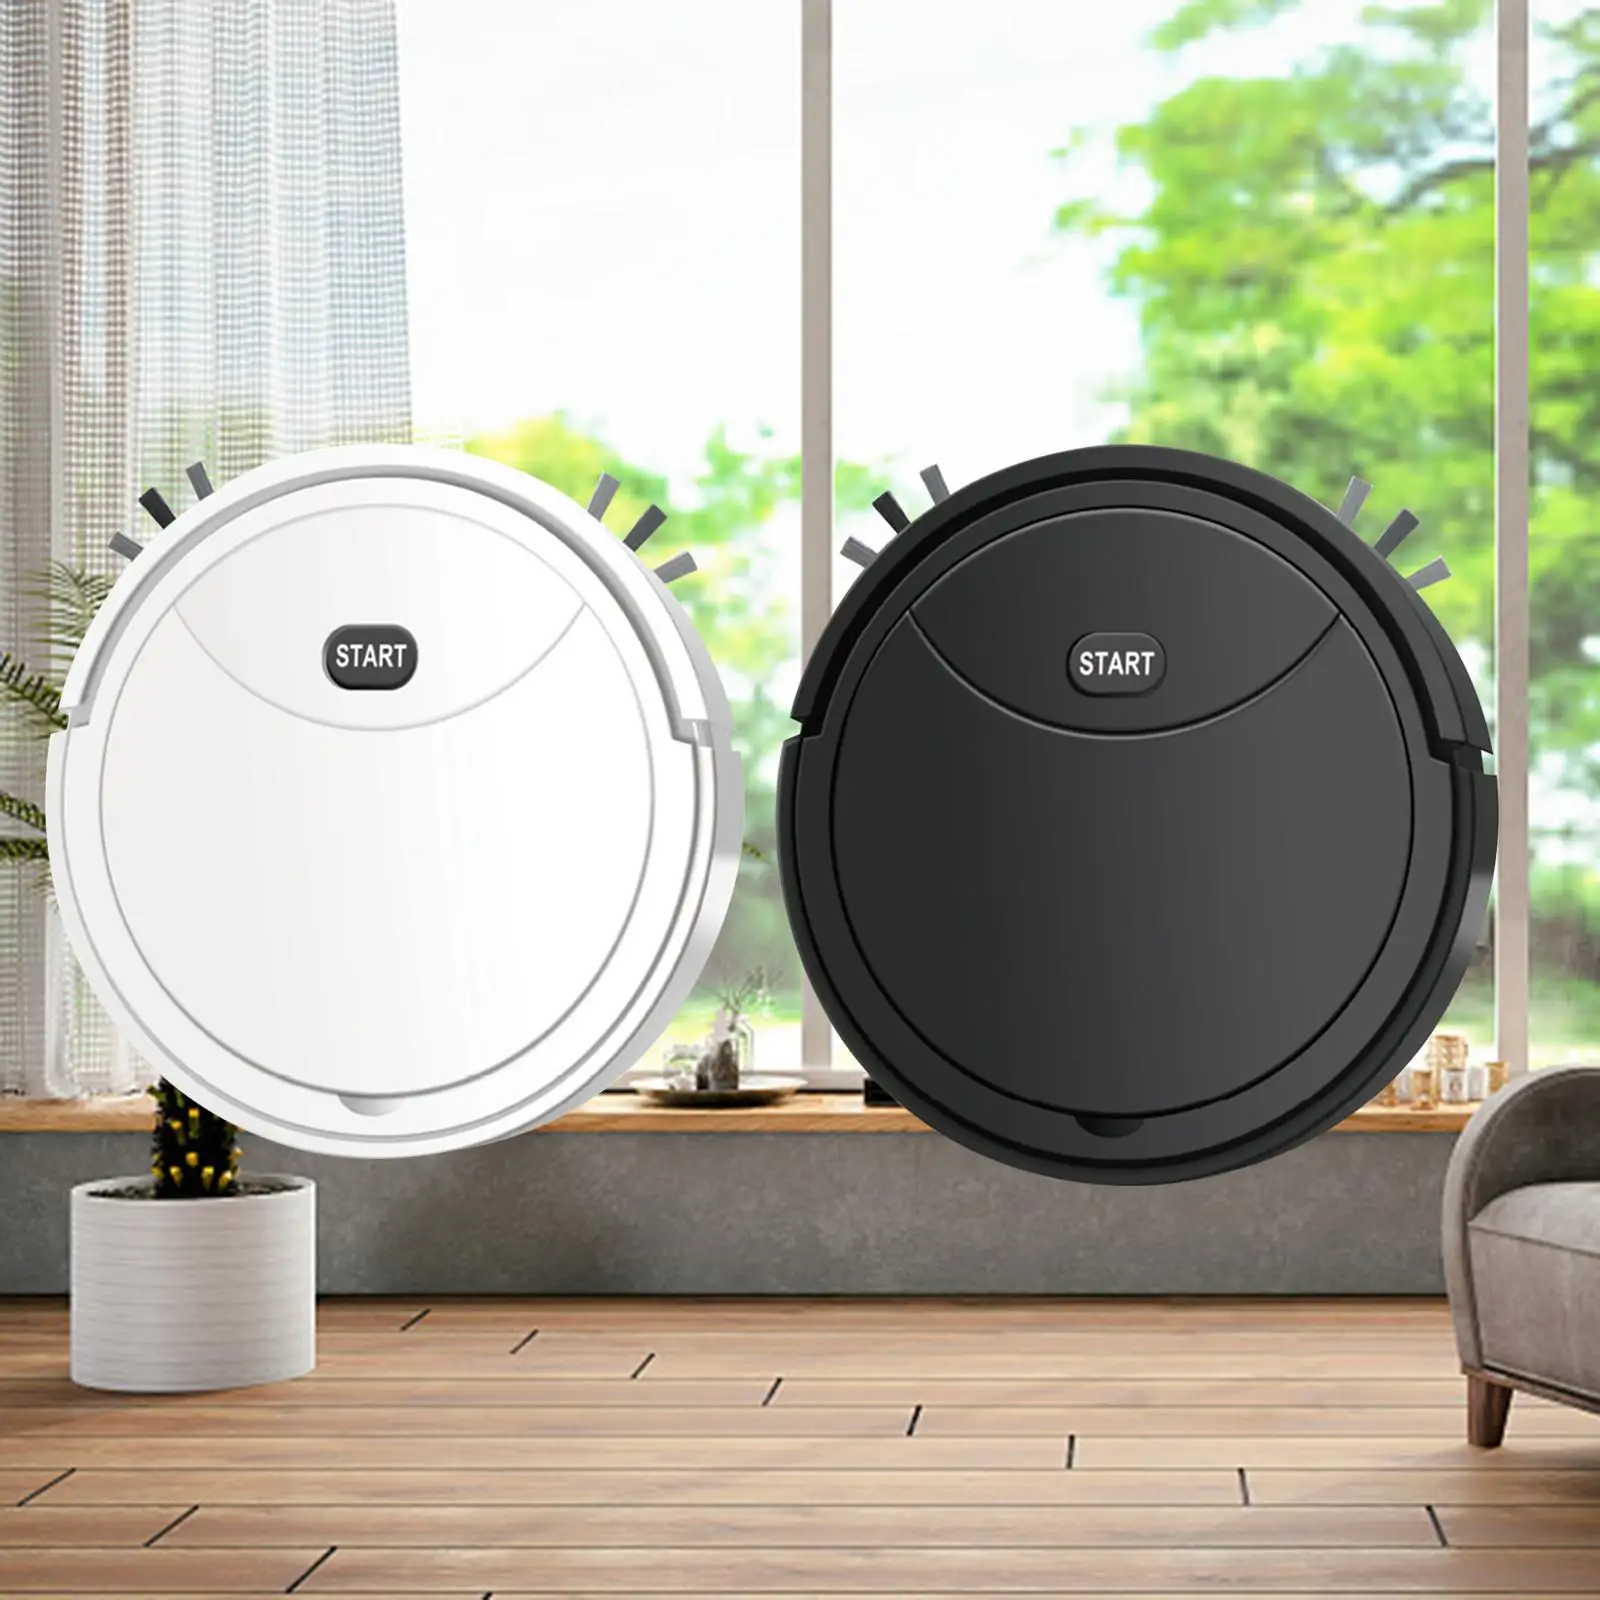 Robot Vacuum Cleaner Electric Sweeper 90 Mins Runtime Strong Suction Quiet 3 in 1 Robotic Vacuum for Tile Floor